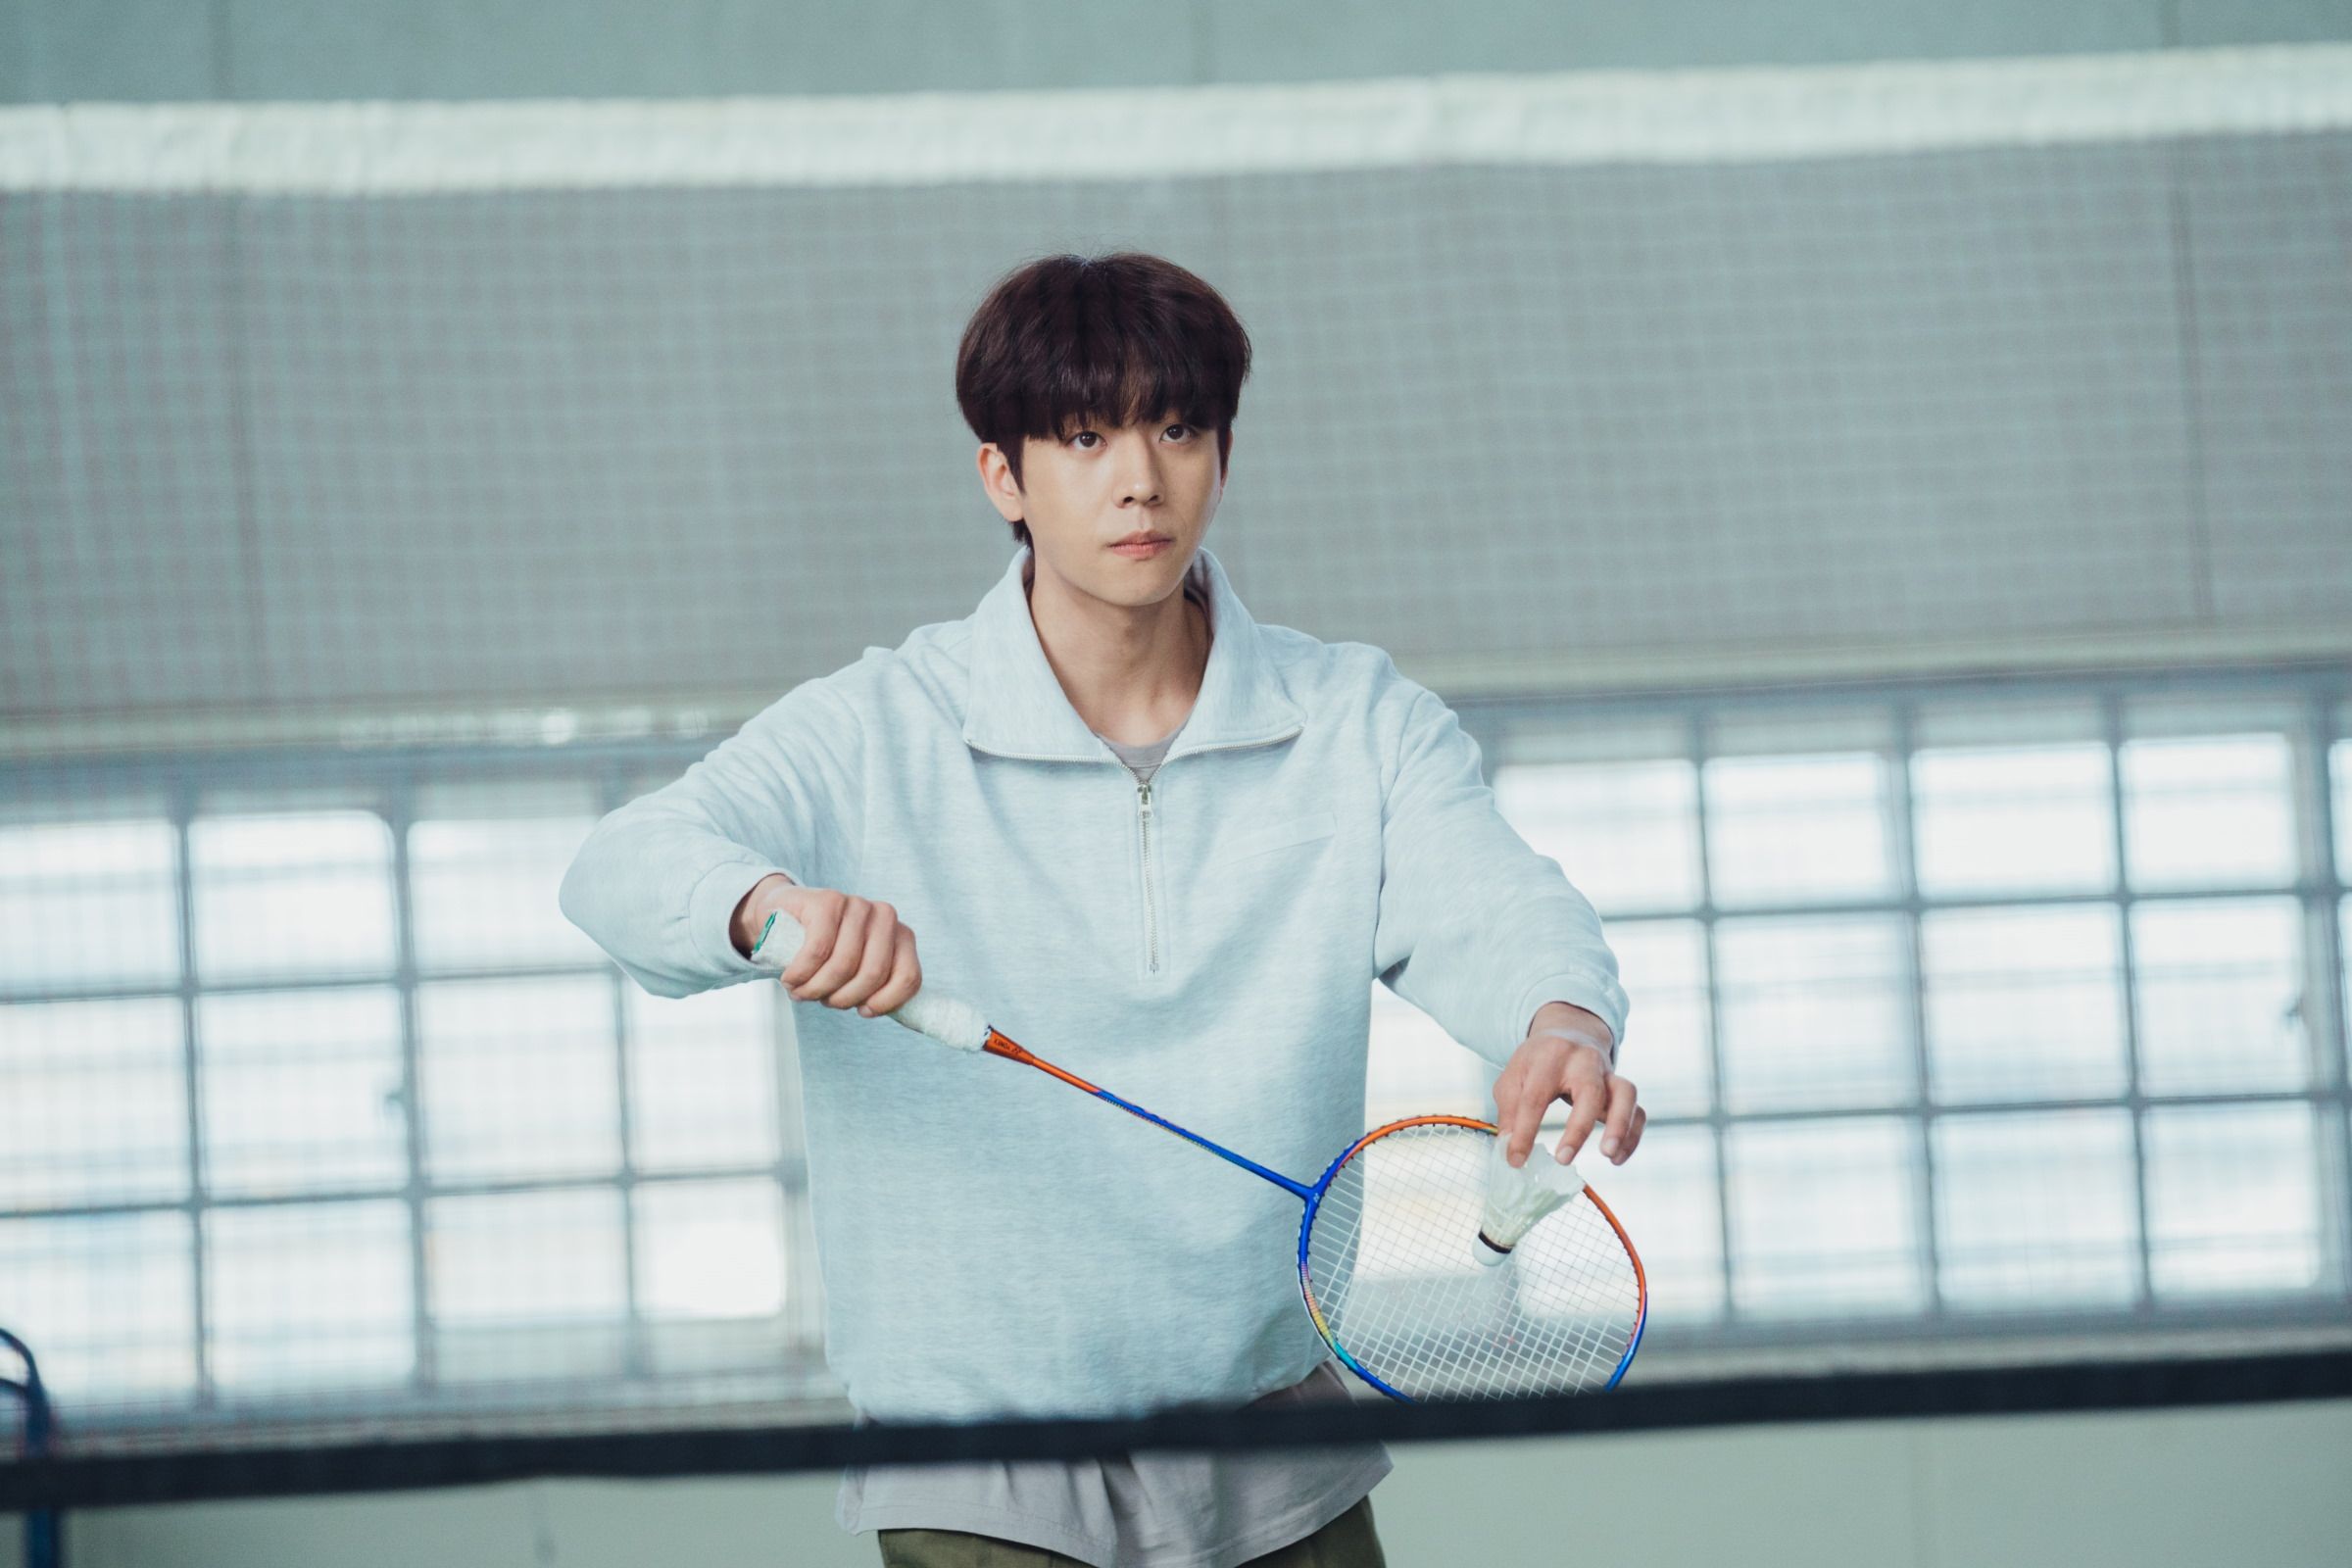 Chae Jong Hyeop And Park Ju Hyun Gear Up For A Badminton Match In New  Romance Drama “Love All Play”